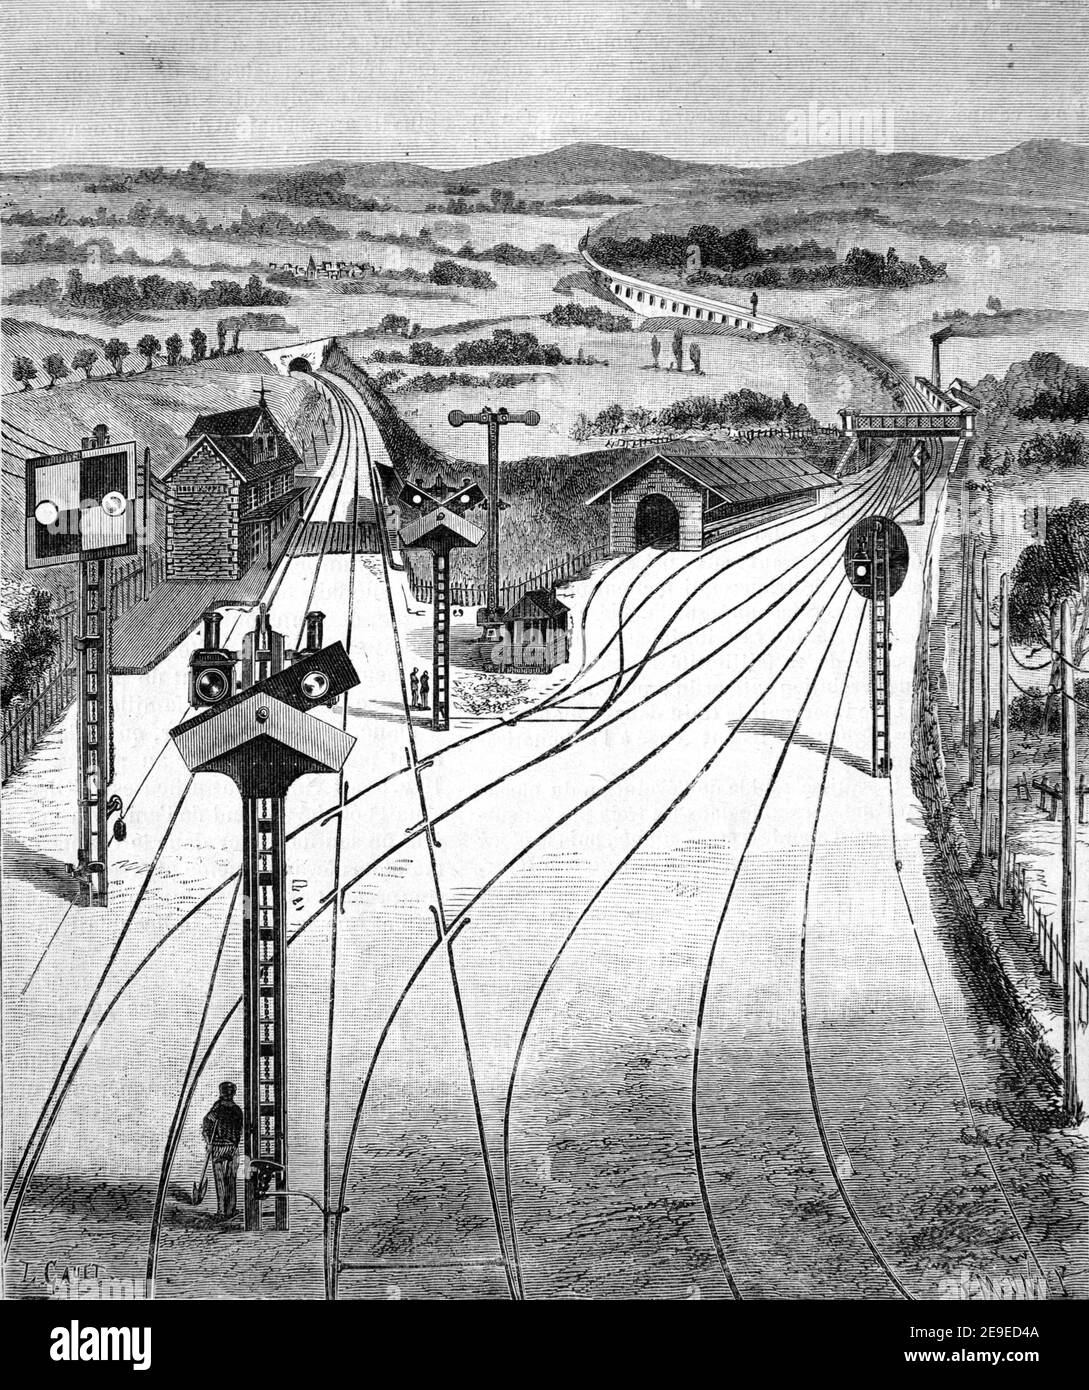 Early Railroad Track or Diverging Railway Lines with Semaphore & Light Signals showing Railroad or Railway Switch or set of Points 1910 Vintage Illustration or Engraving Stock Photo